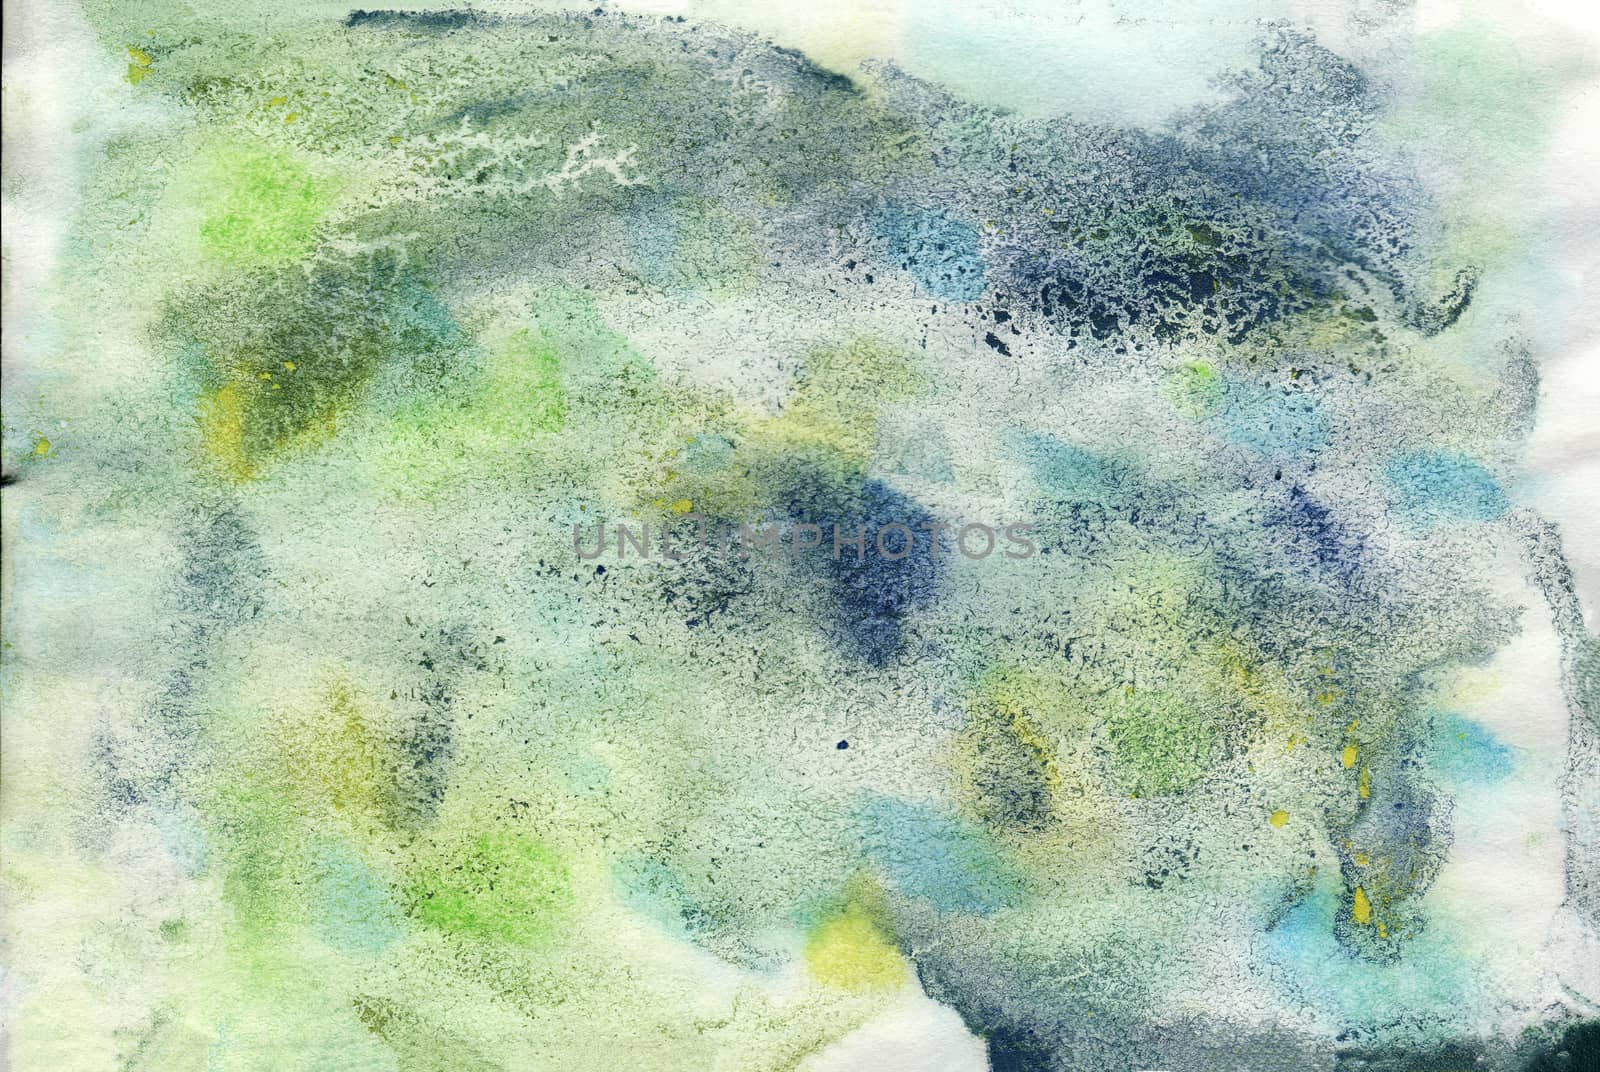 Light blue, green and yellow hand-painted texture, watercolor painting, splashes, drops of paint, paint smears. Design for backgrounds, wallpapers, covers and packaging.